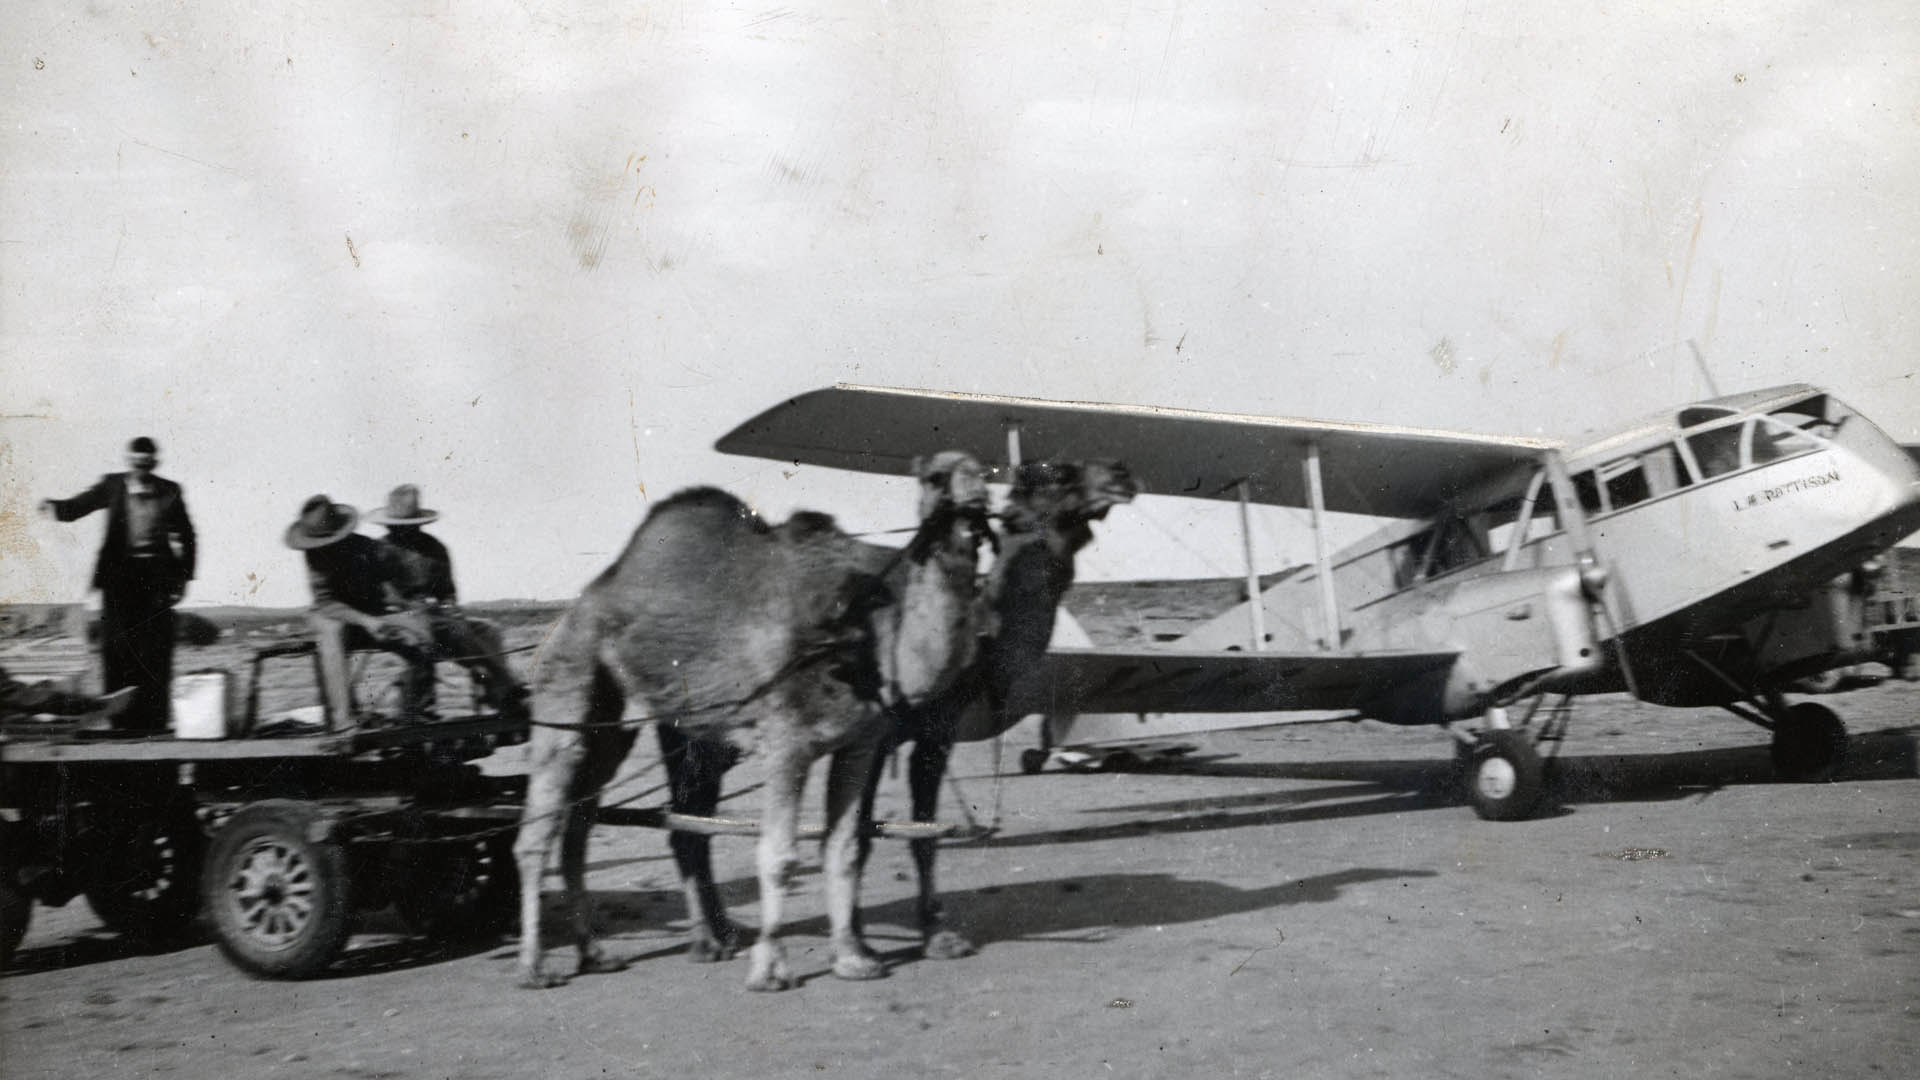 'Victory', the original RFDS aircraft